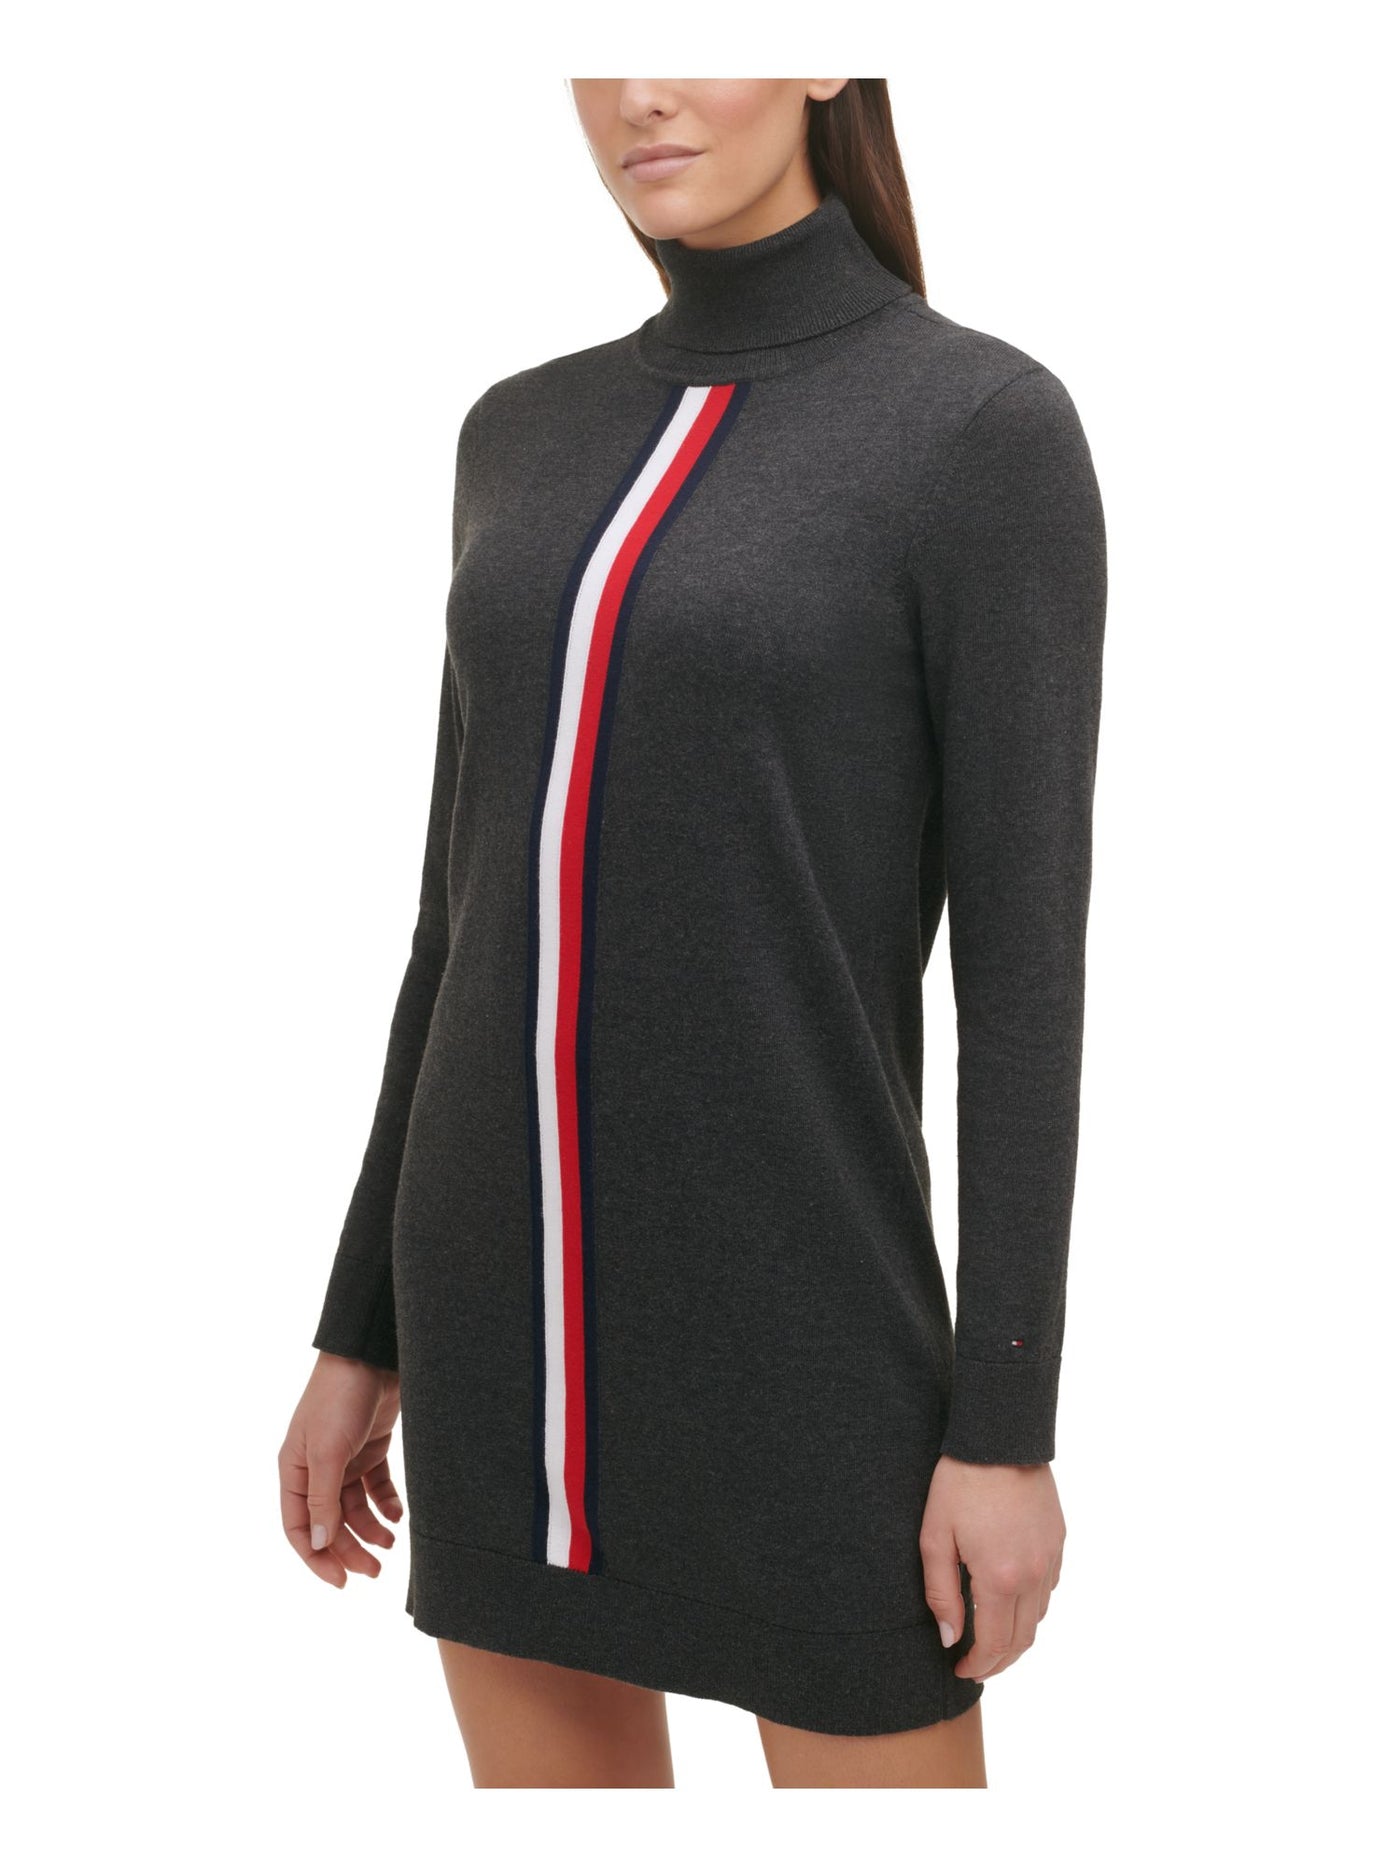 TOMMY HILFIGER Womens Gray Heather Long Sleeve Turtle Neck Short Sweater Dress S